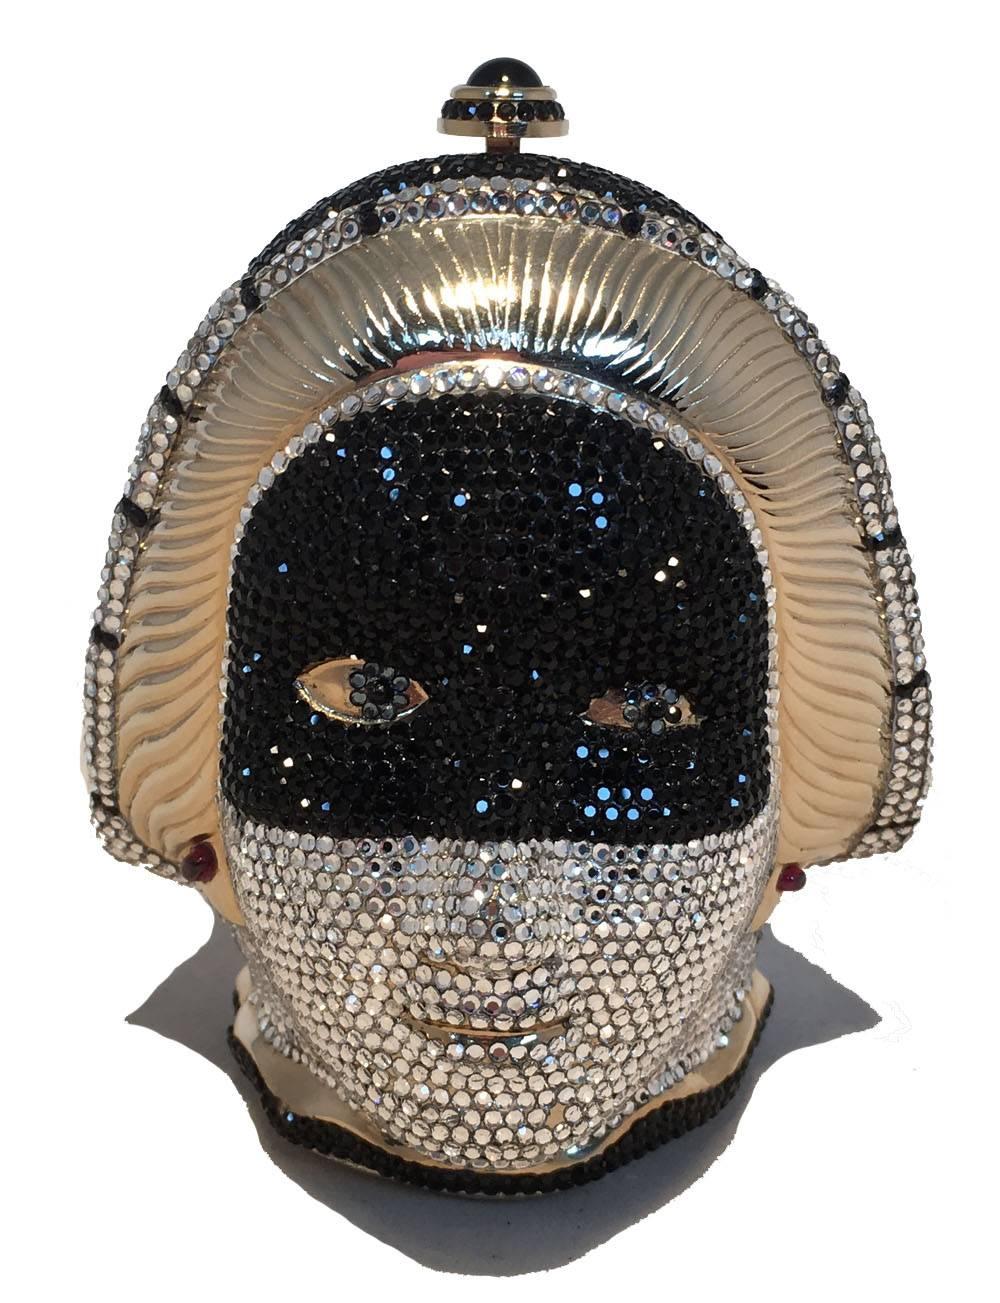 STUNNING Judith Leiber Queen head Swarovski crystal minaudiere in excellent condition.  Unique Queen of hearts head design with black and white swarovski crystals throughout.  Top button closure opens to a gold leather lined interior that holds 2